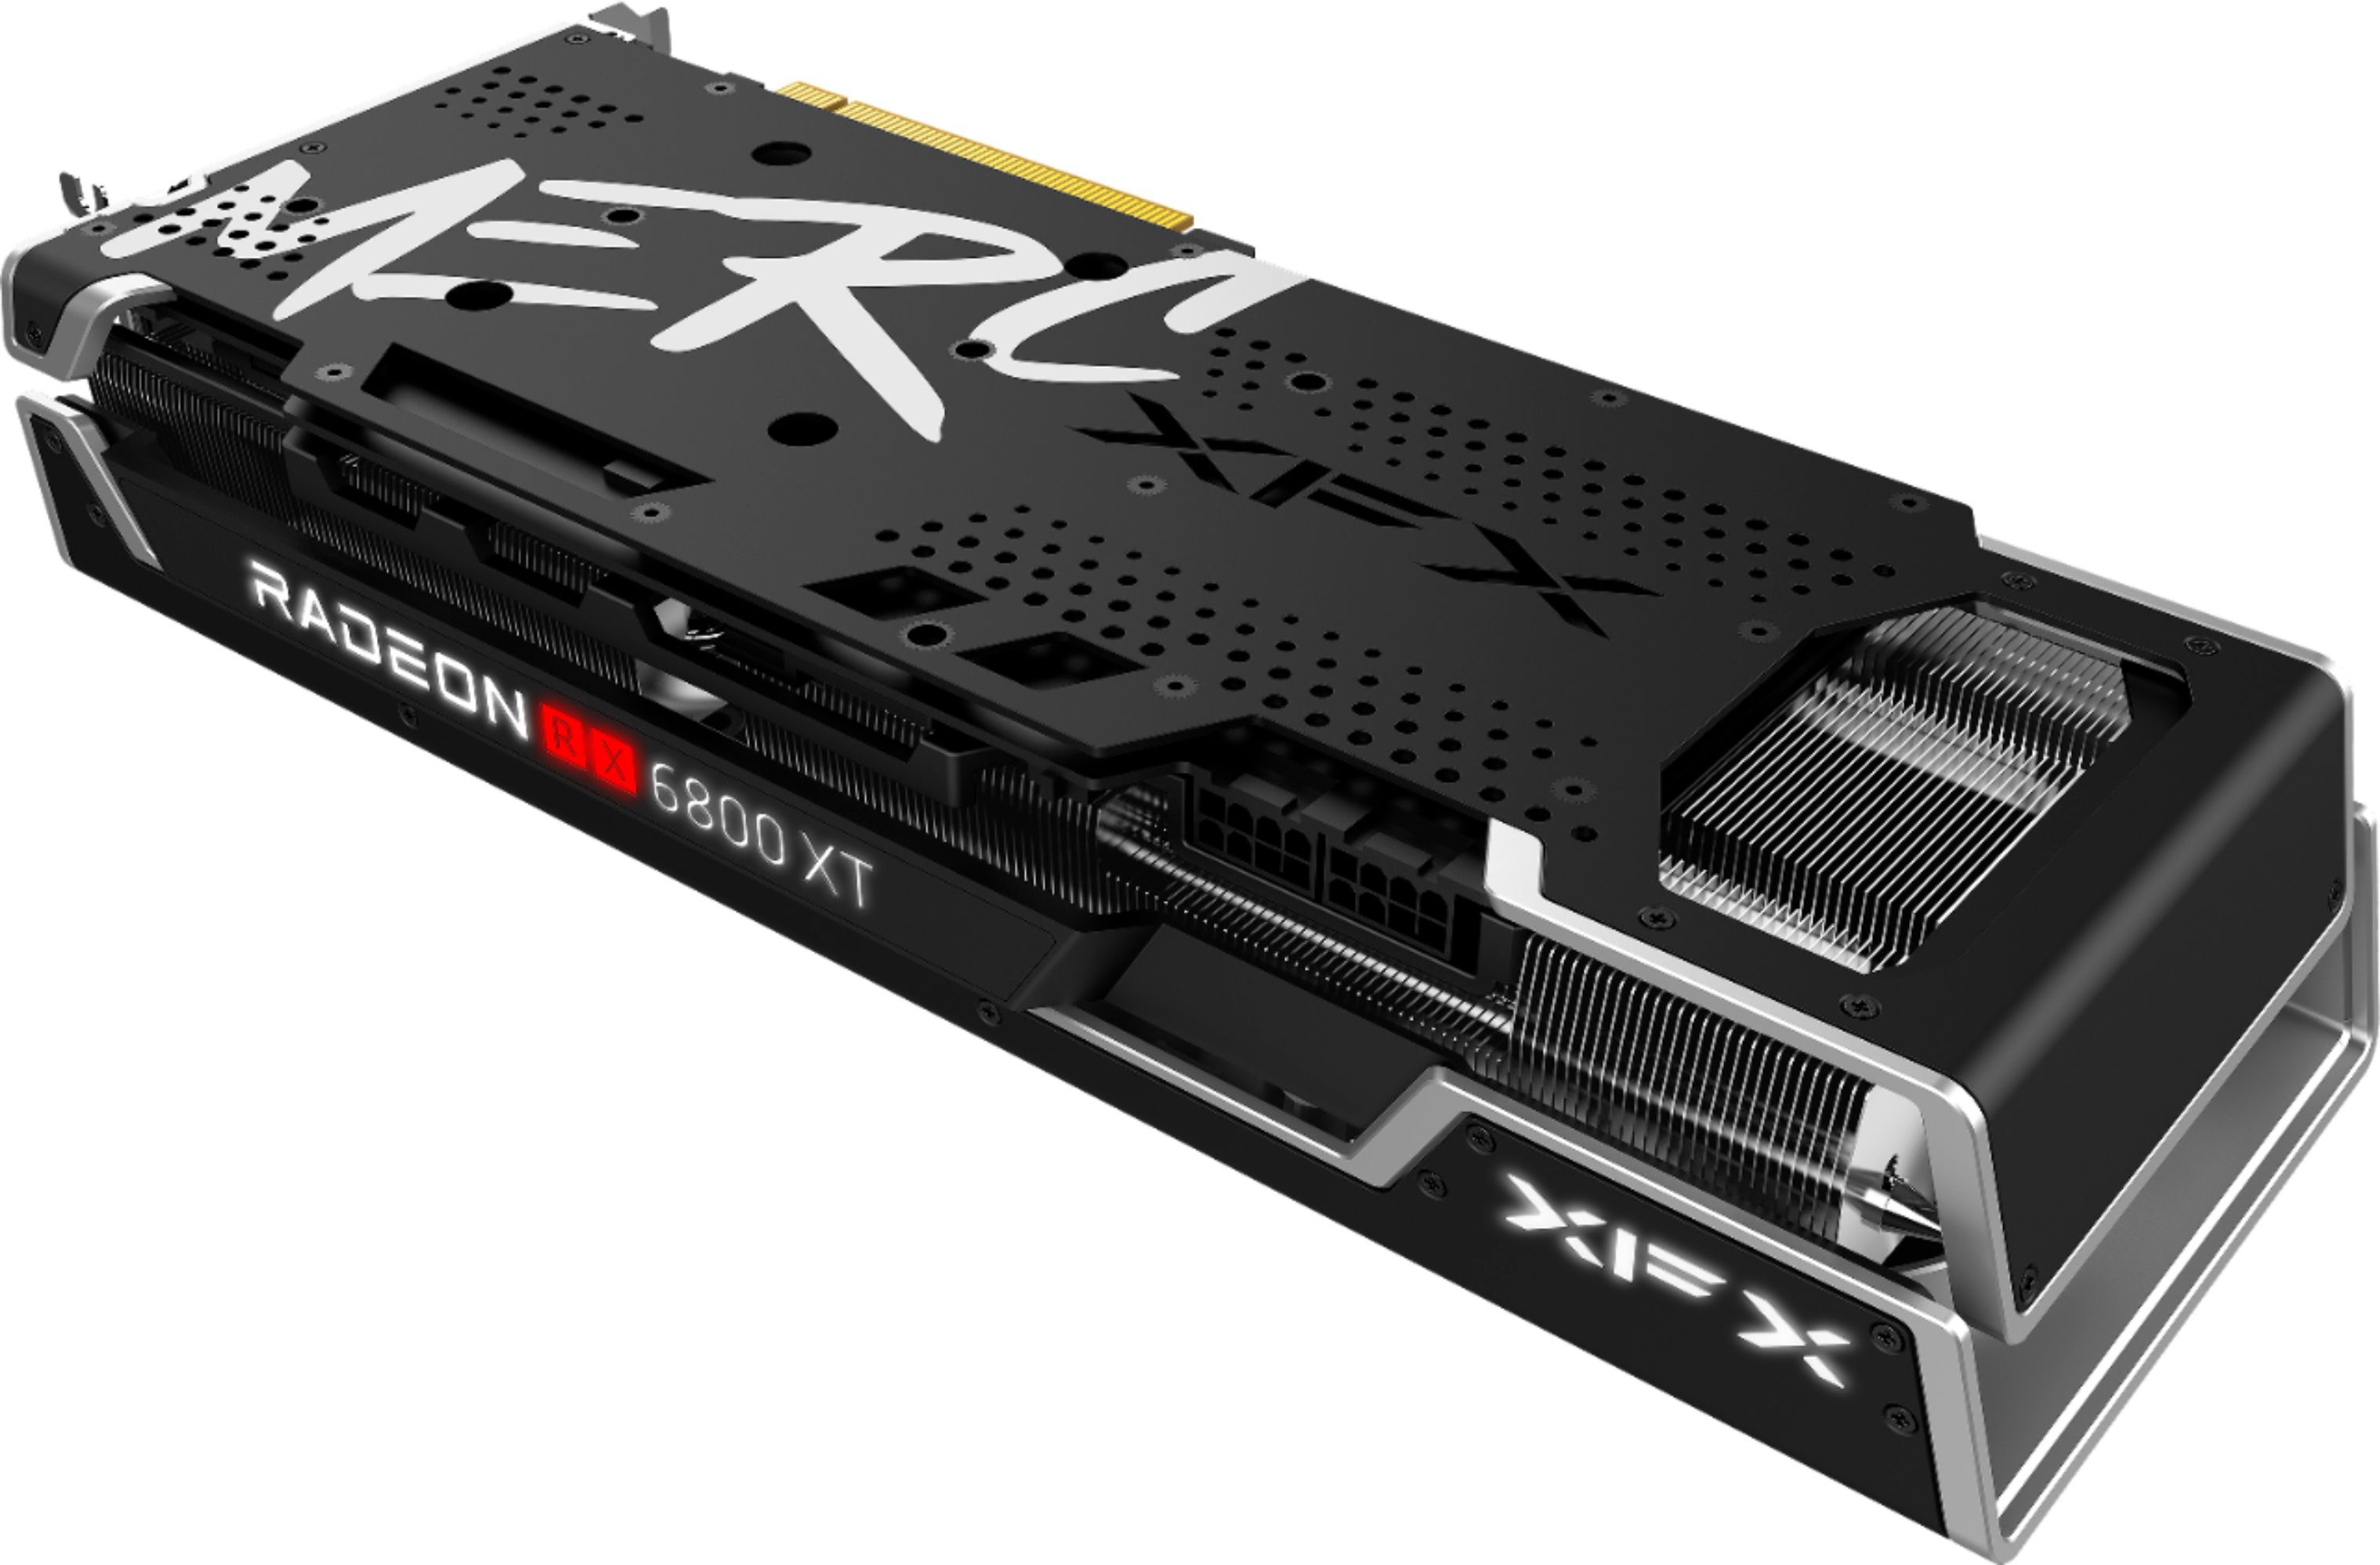 The XFX AMD Radeon RX 6800 XT GPU Is Down to $429.99 and Includes Starfield